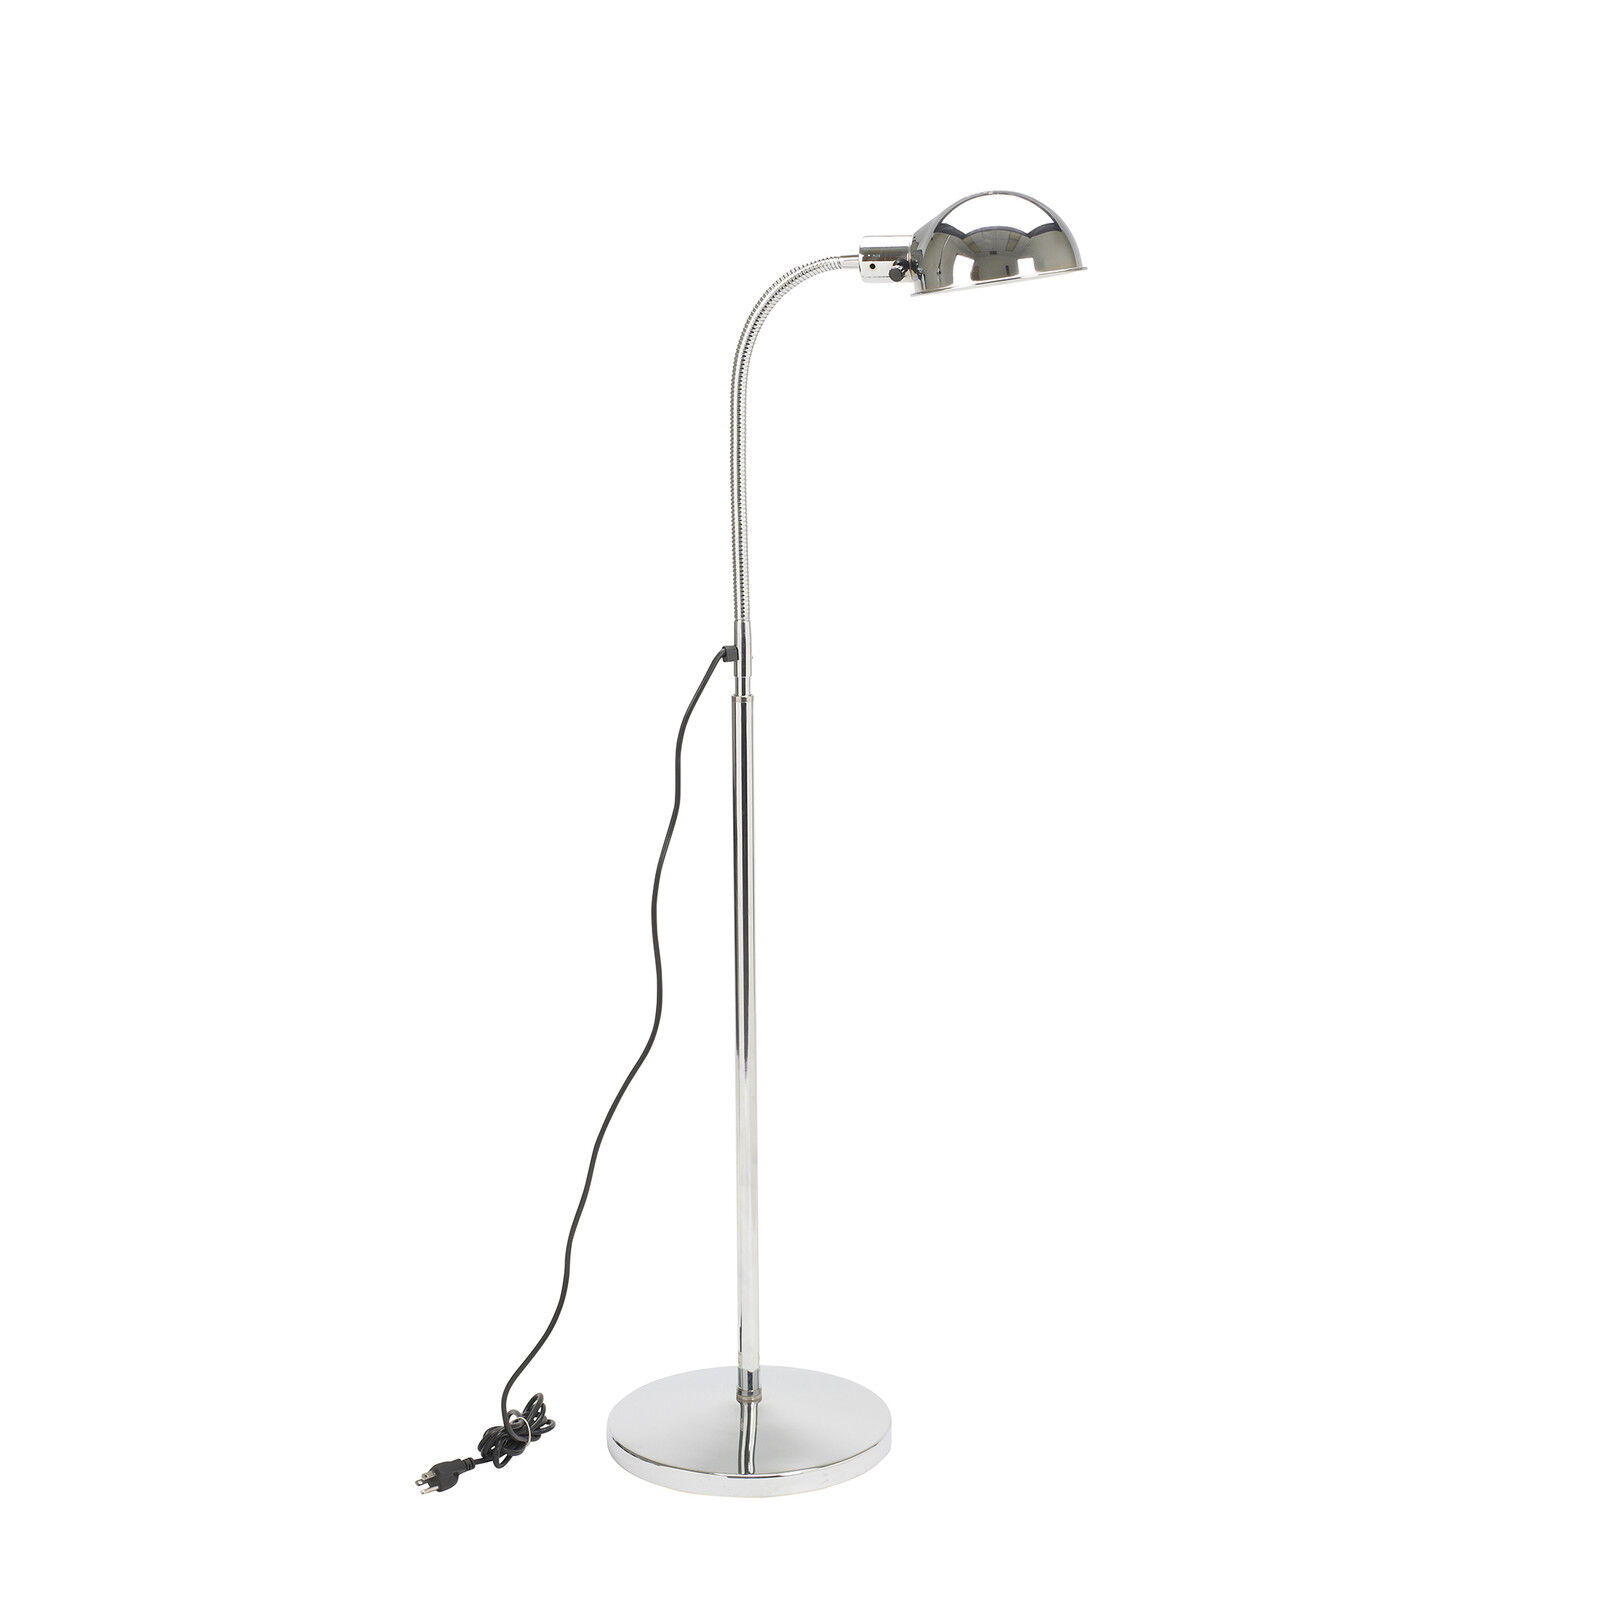 Drive Medical 13408 Goose Neck Exam Lamp, Dome Style Shade